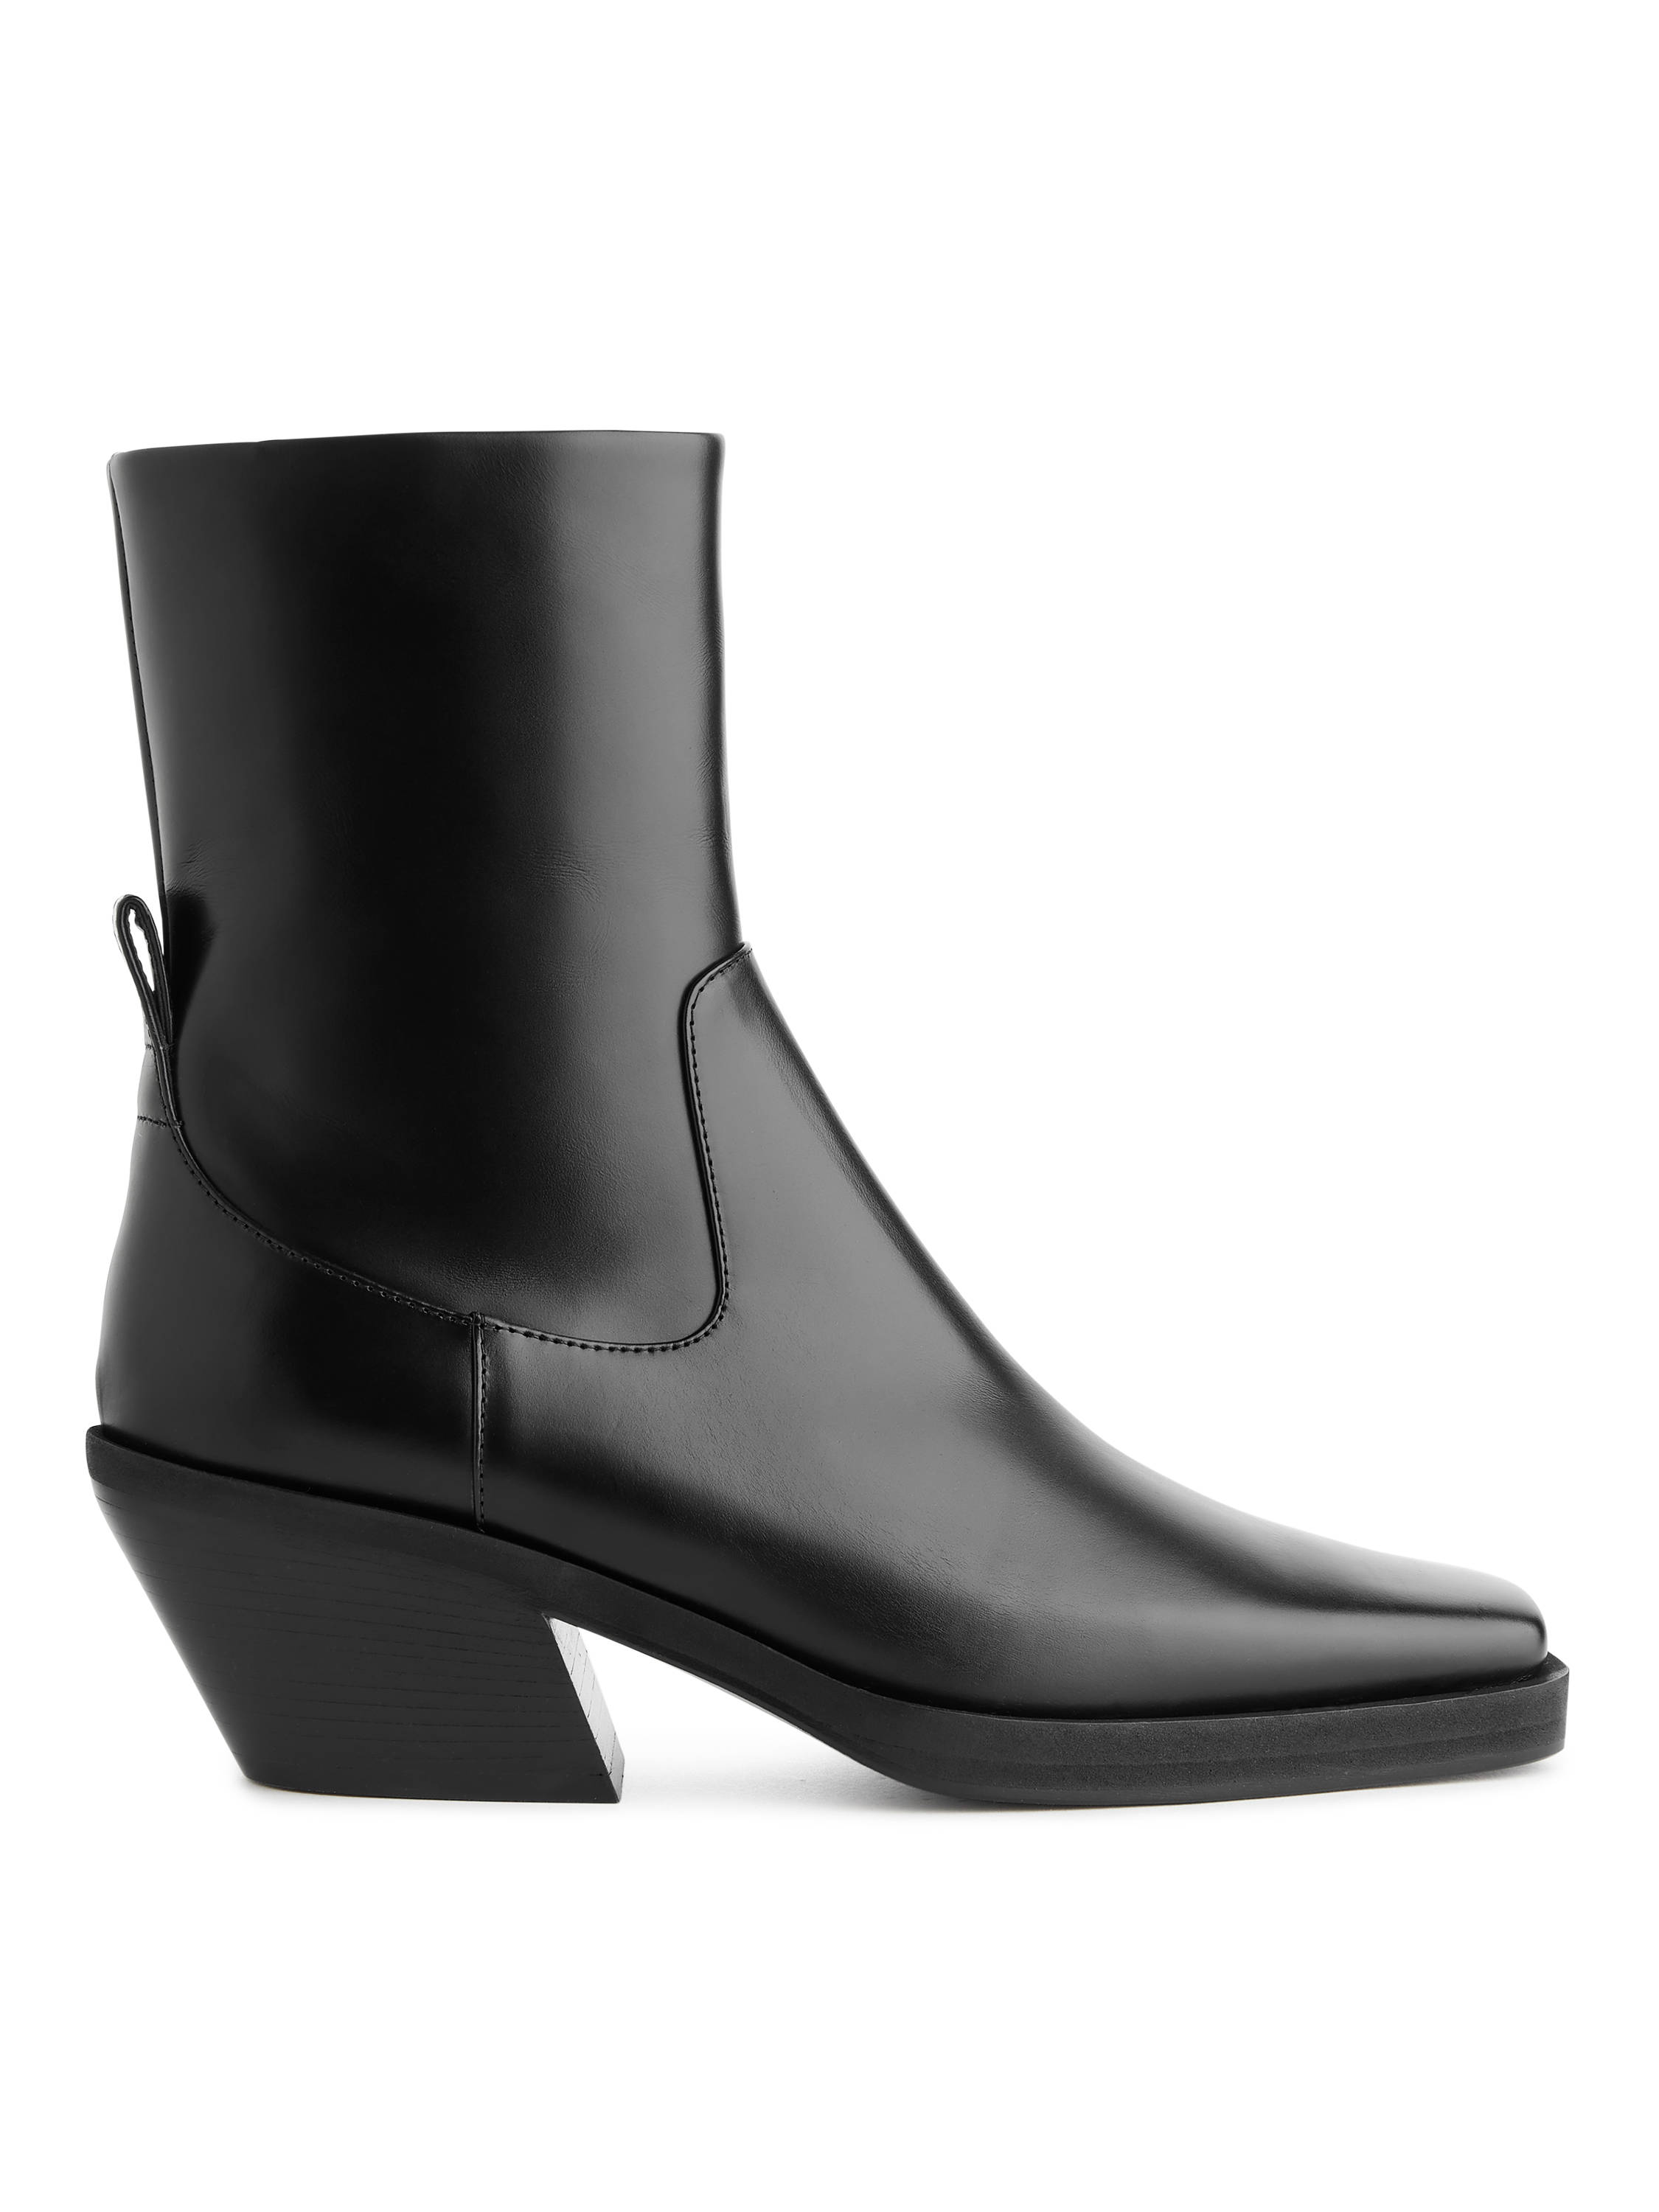 Arket Square-Toe Leather Boots